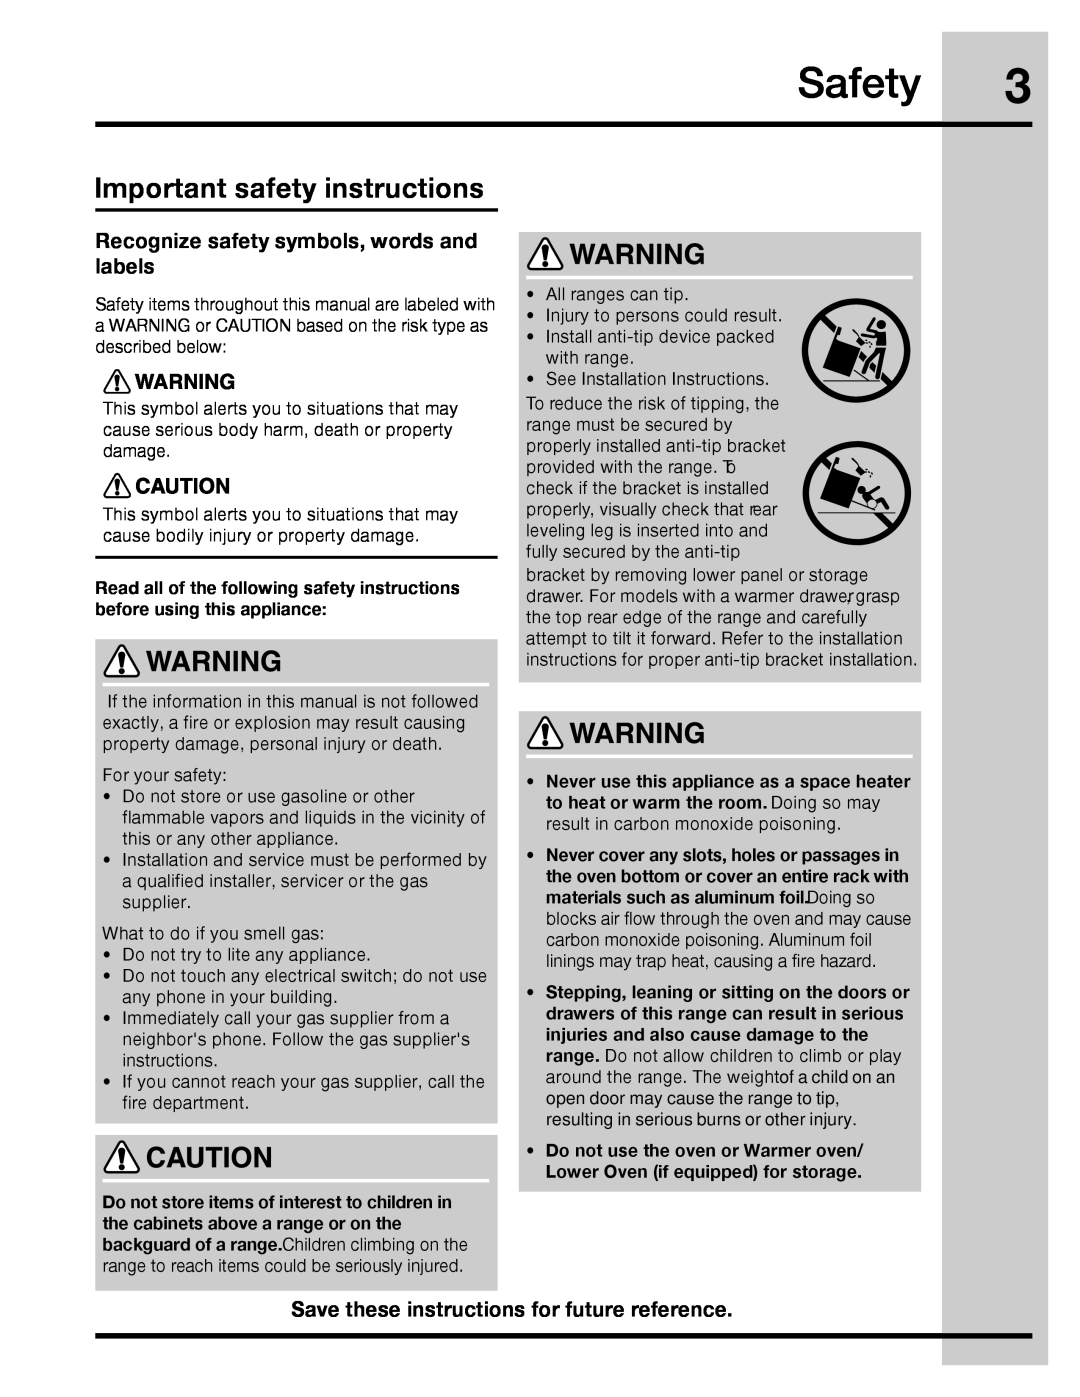 Electrolux 316471110 manual Safety, Important safety instructions, Recognize safety symbols, words and labels 